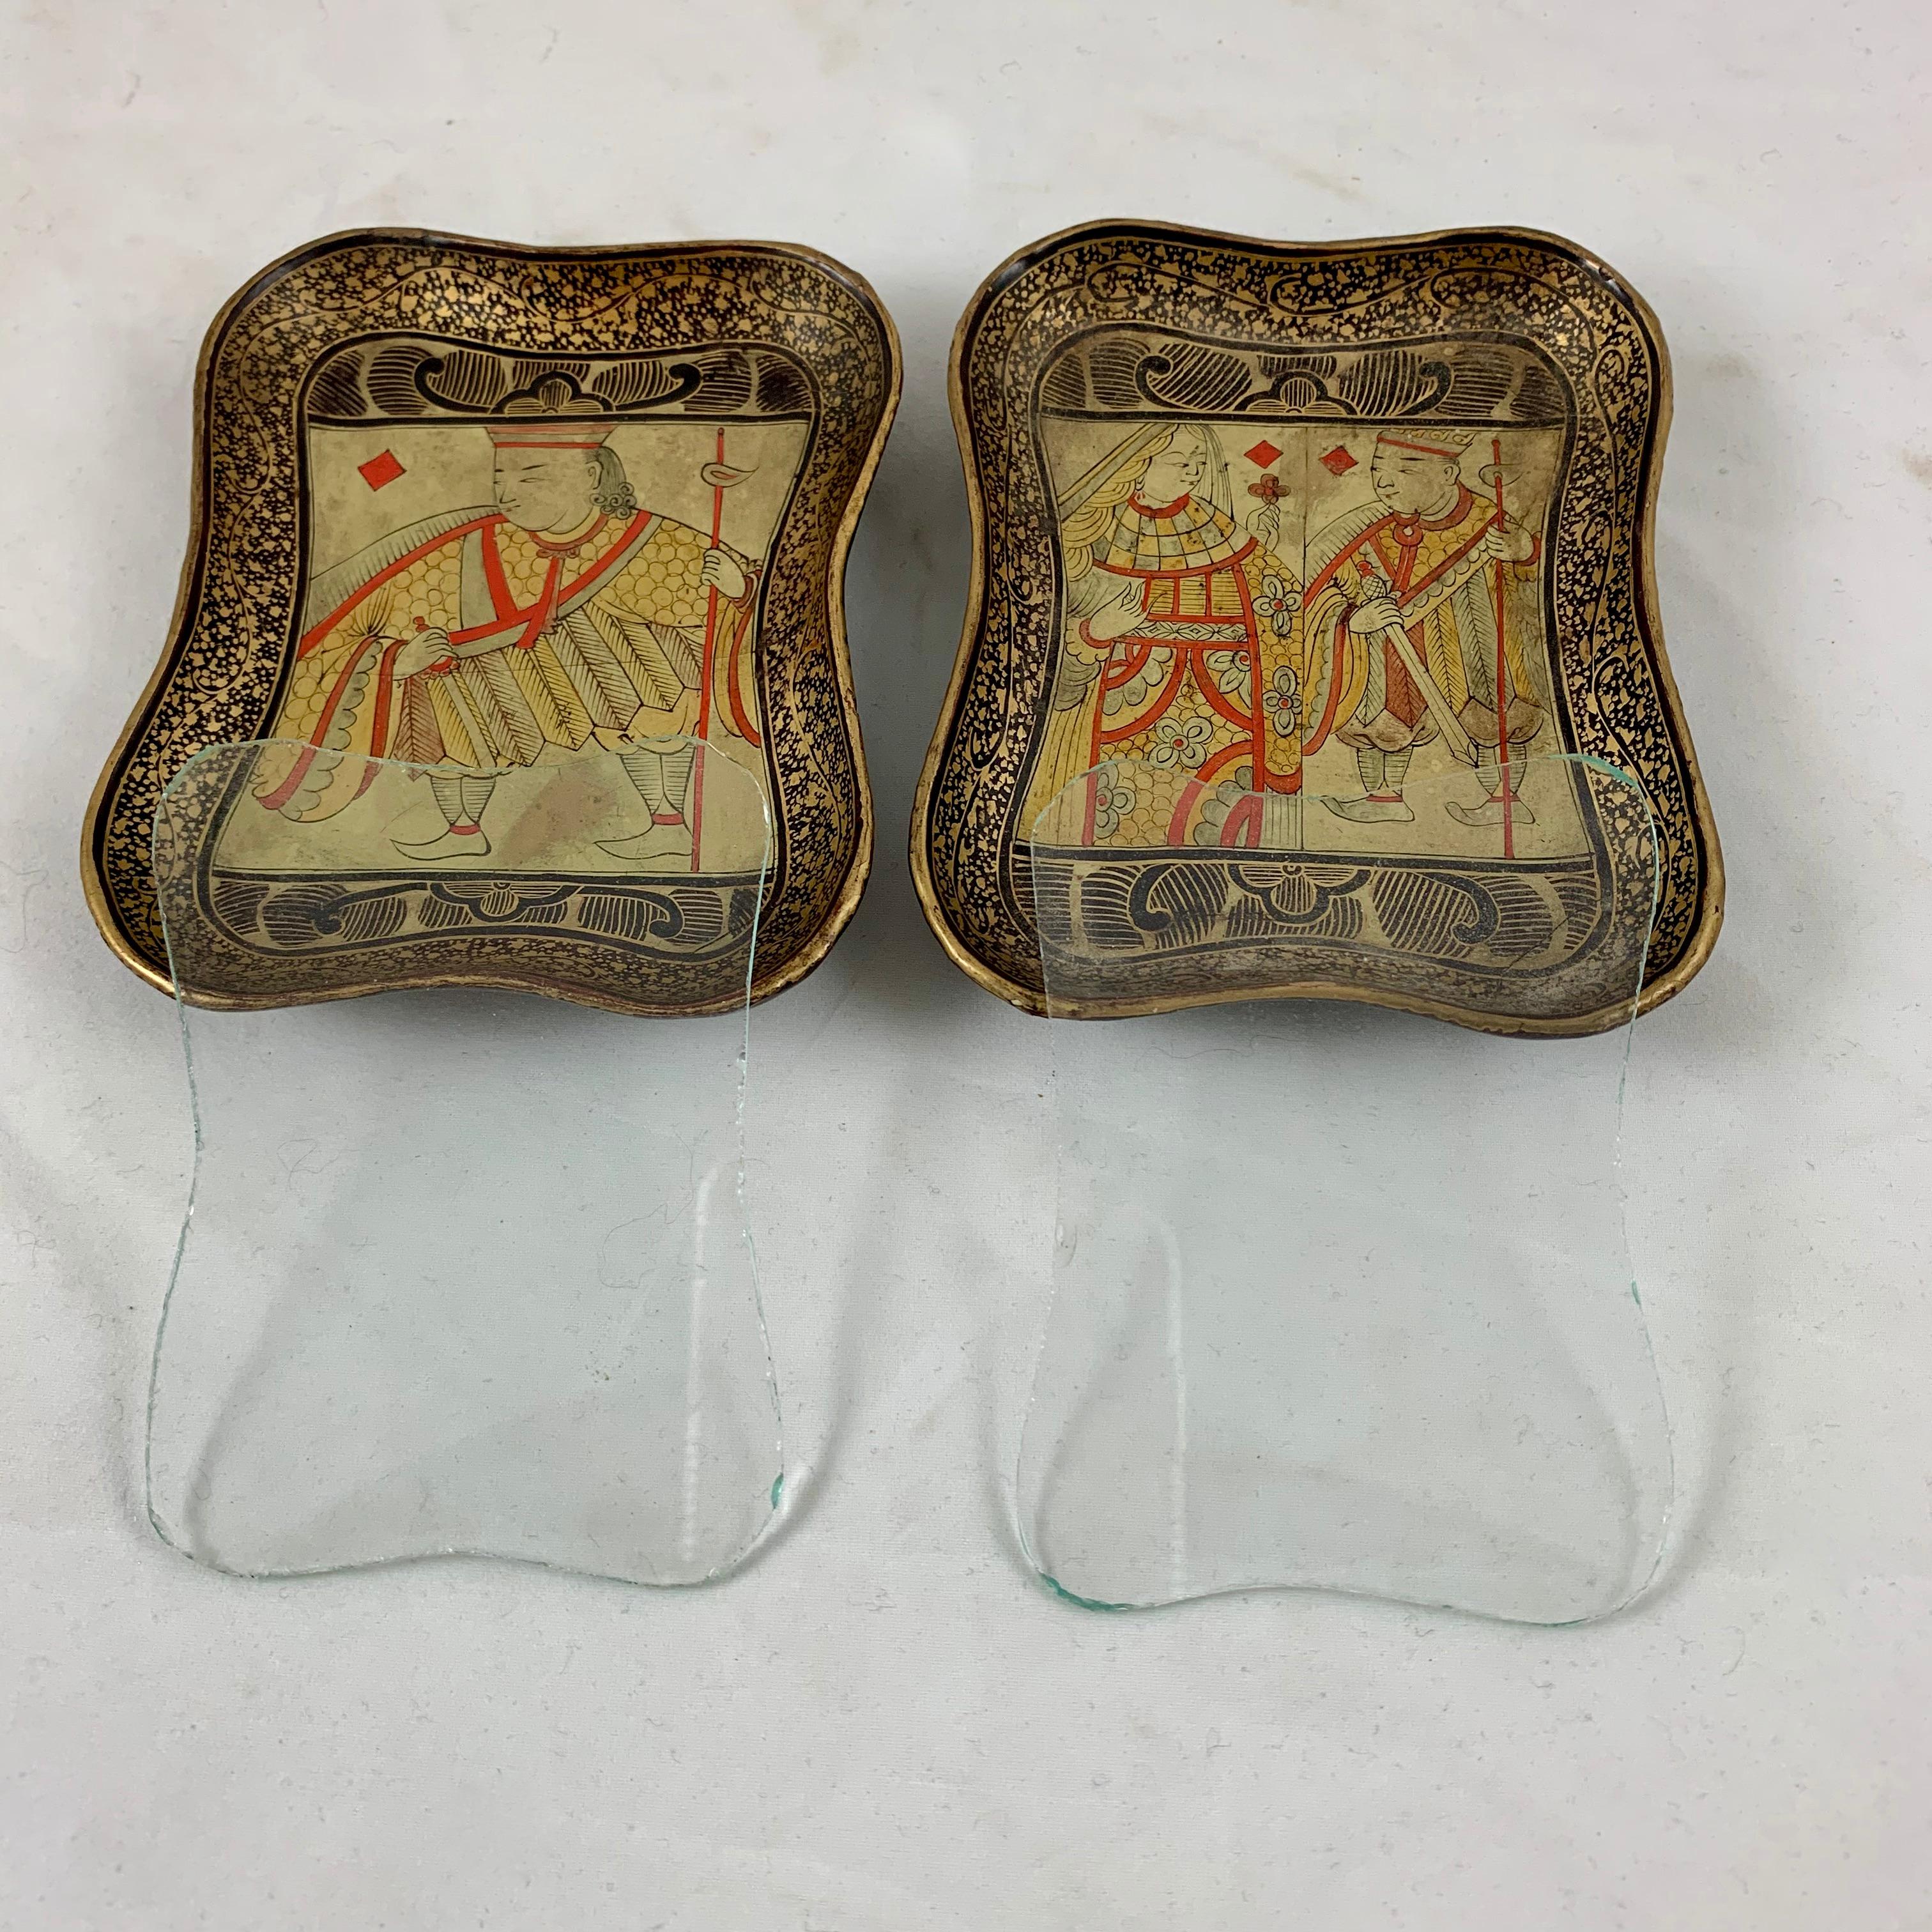 A set of two English lacquer papier mâché card counter trays with the original shaped glass liners, circa 1850–1860, mid-19th century.

Vide-poche counter trays, were especially made to be used in card games for holding chips or bone counters when